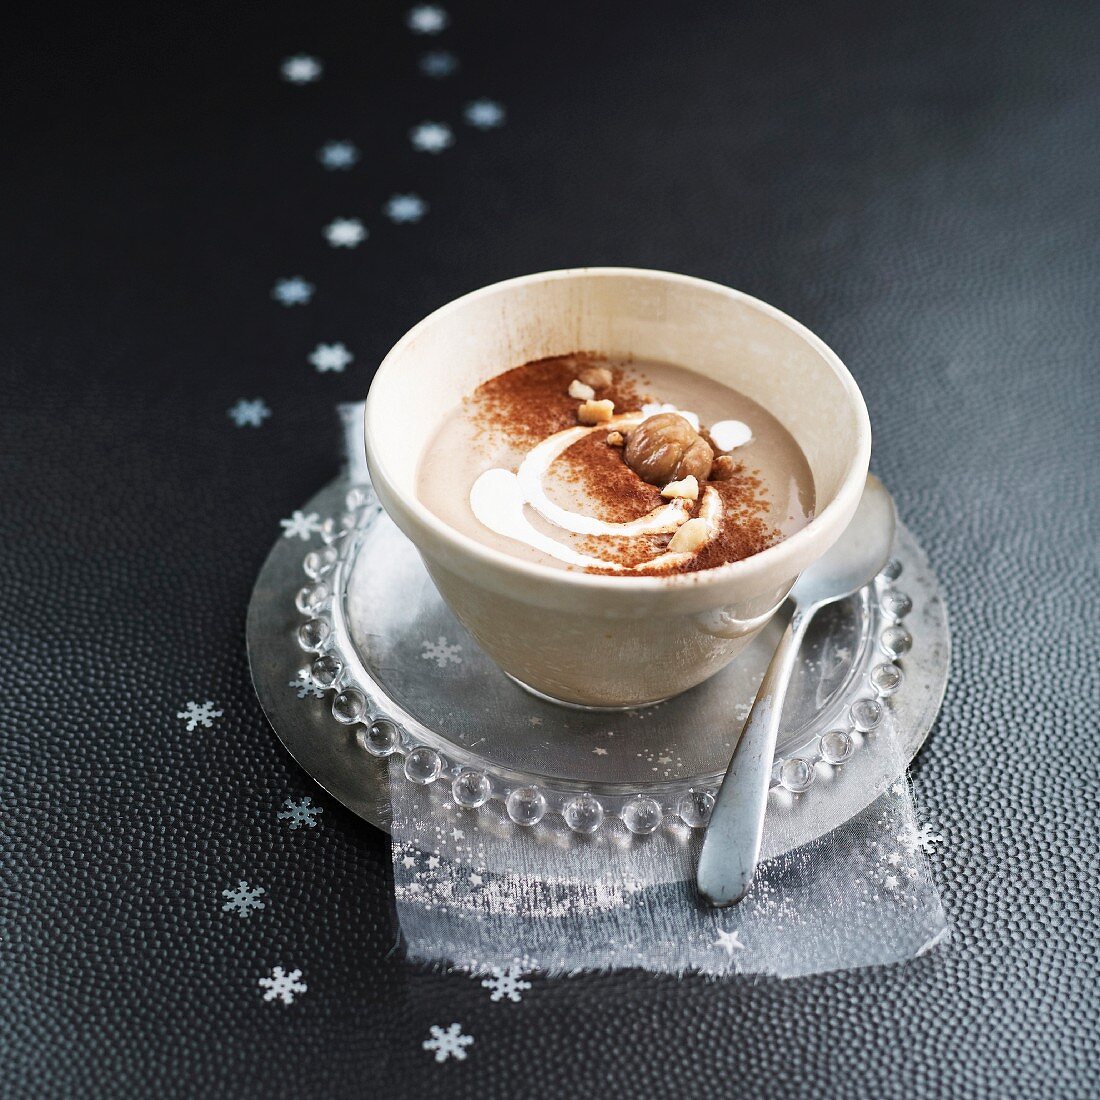 Creamed chestnut soup with cocoa